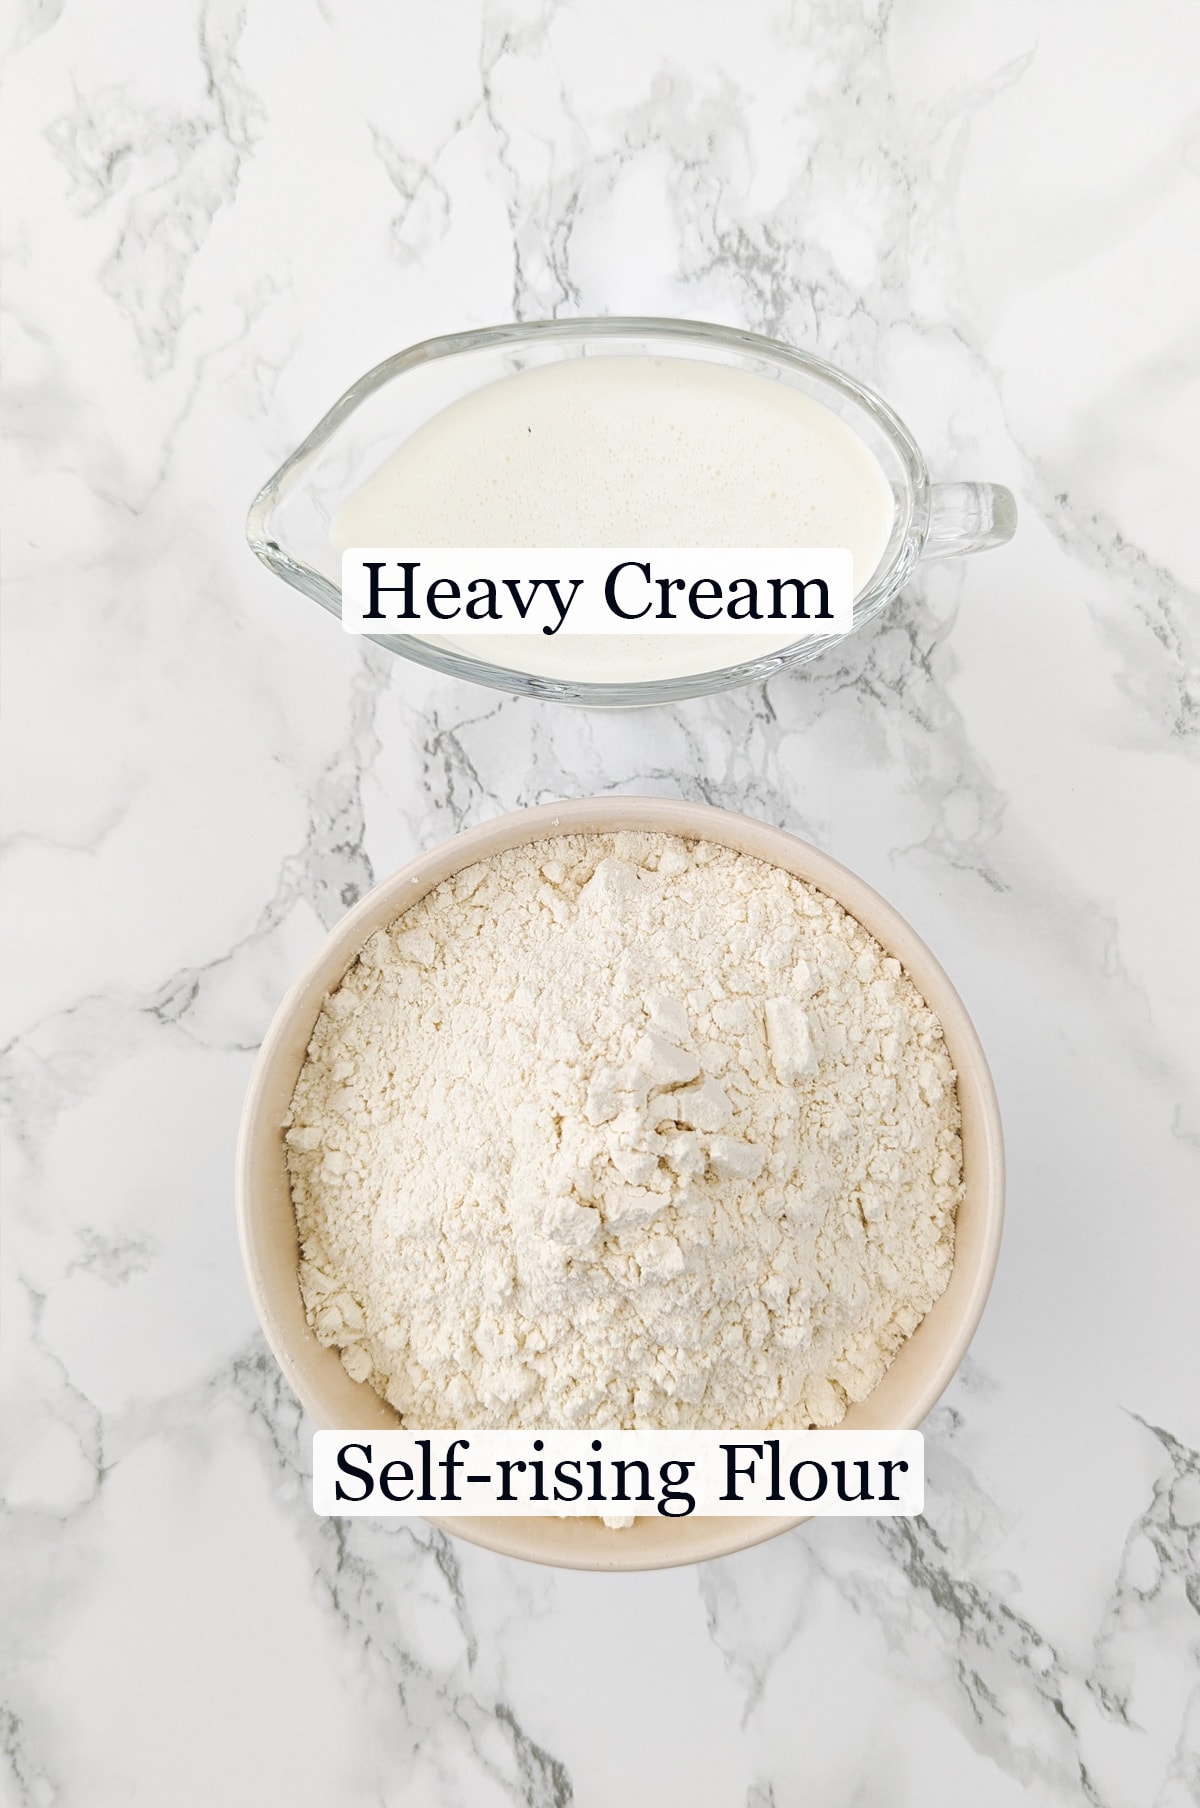 Transparent bowl with heavy cream and self-rising flour near it.